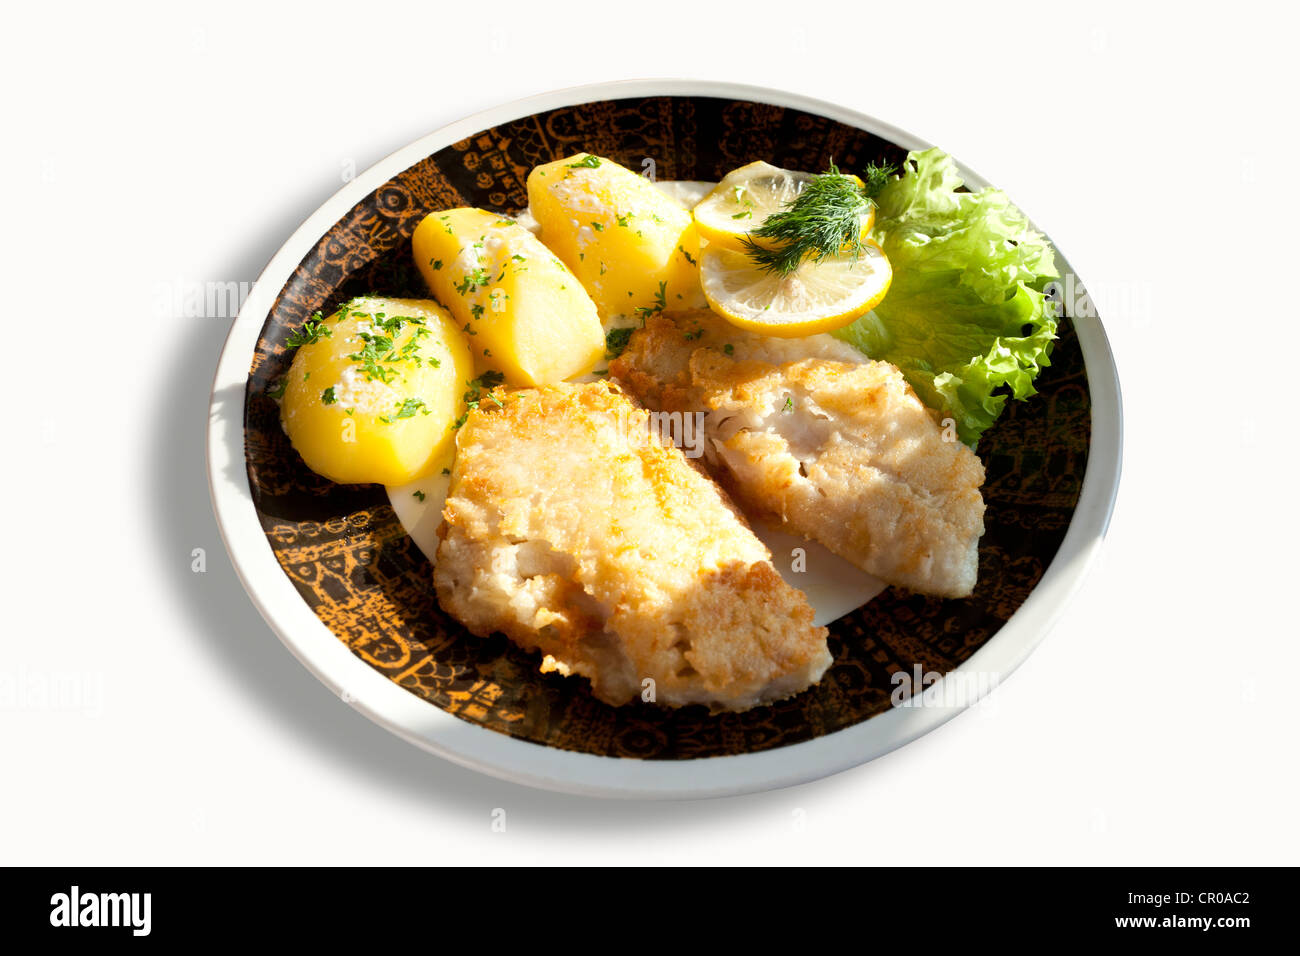 Redfish fillet in batter with boiled potatoes Stock Photo